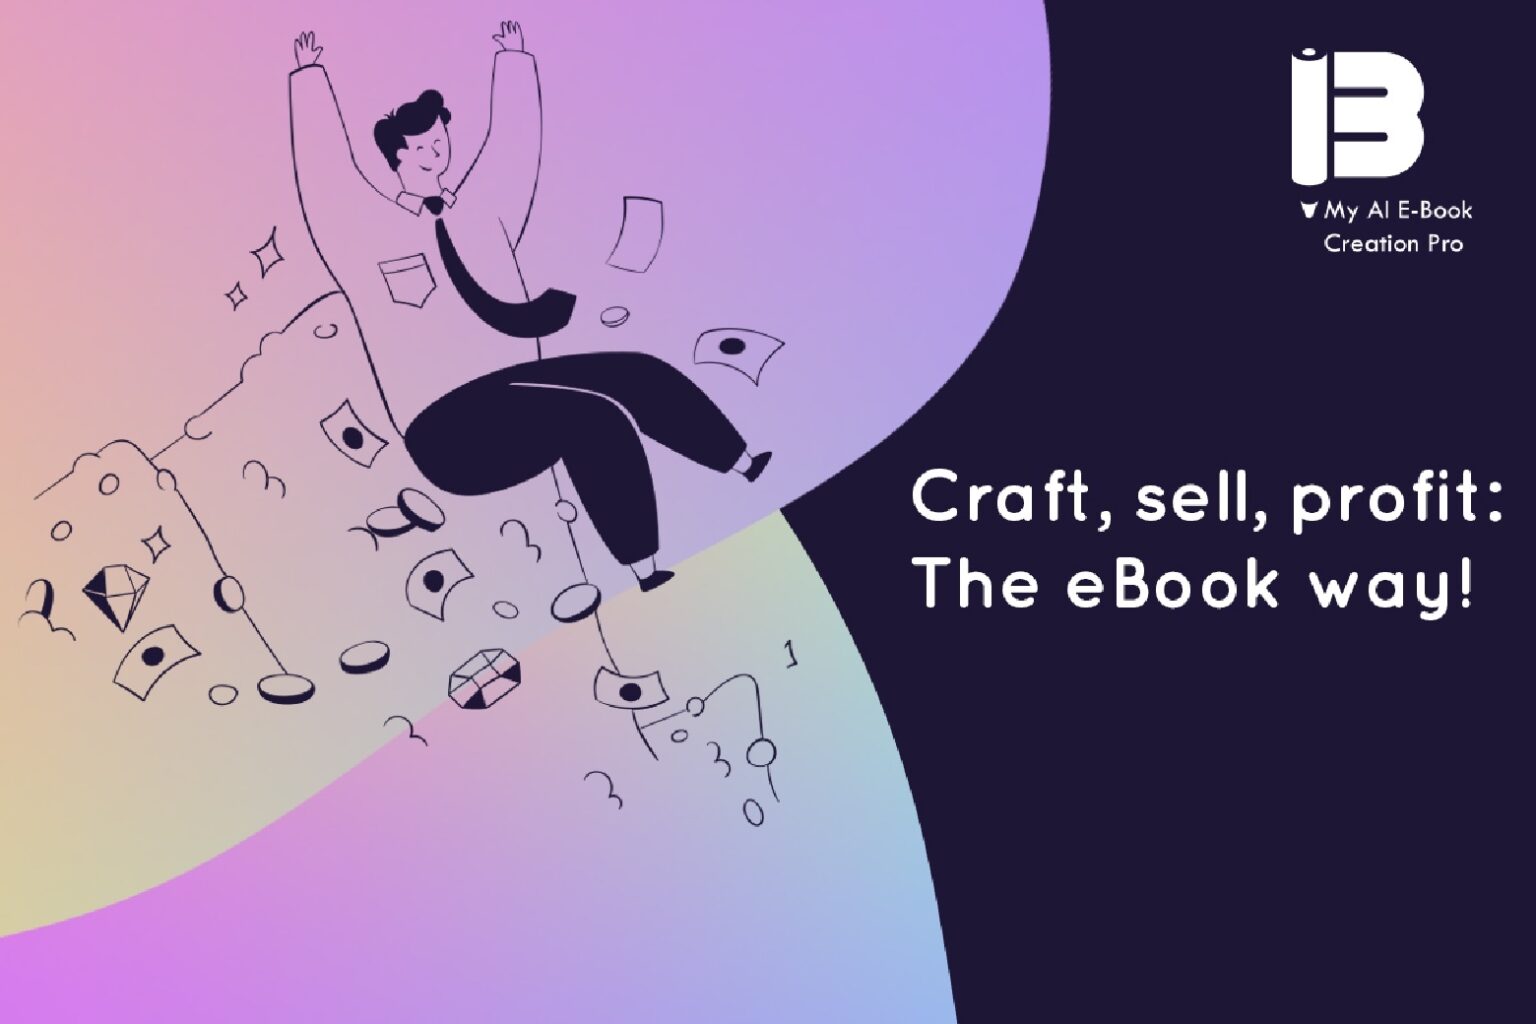 My AI eBook Creation Pro can help you publish e-books for only $25.